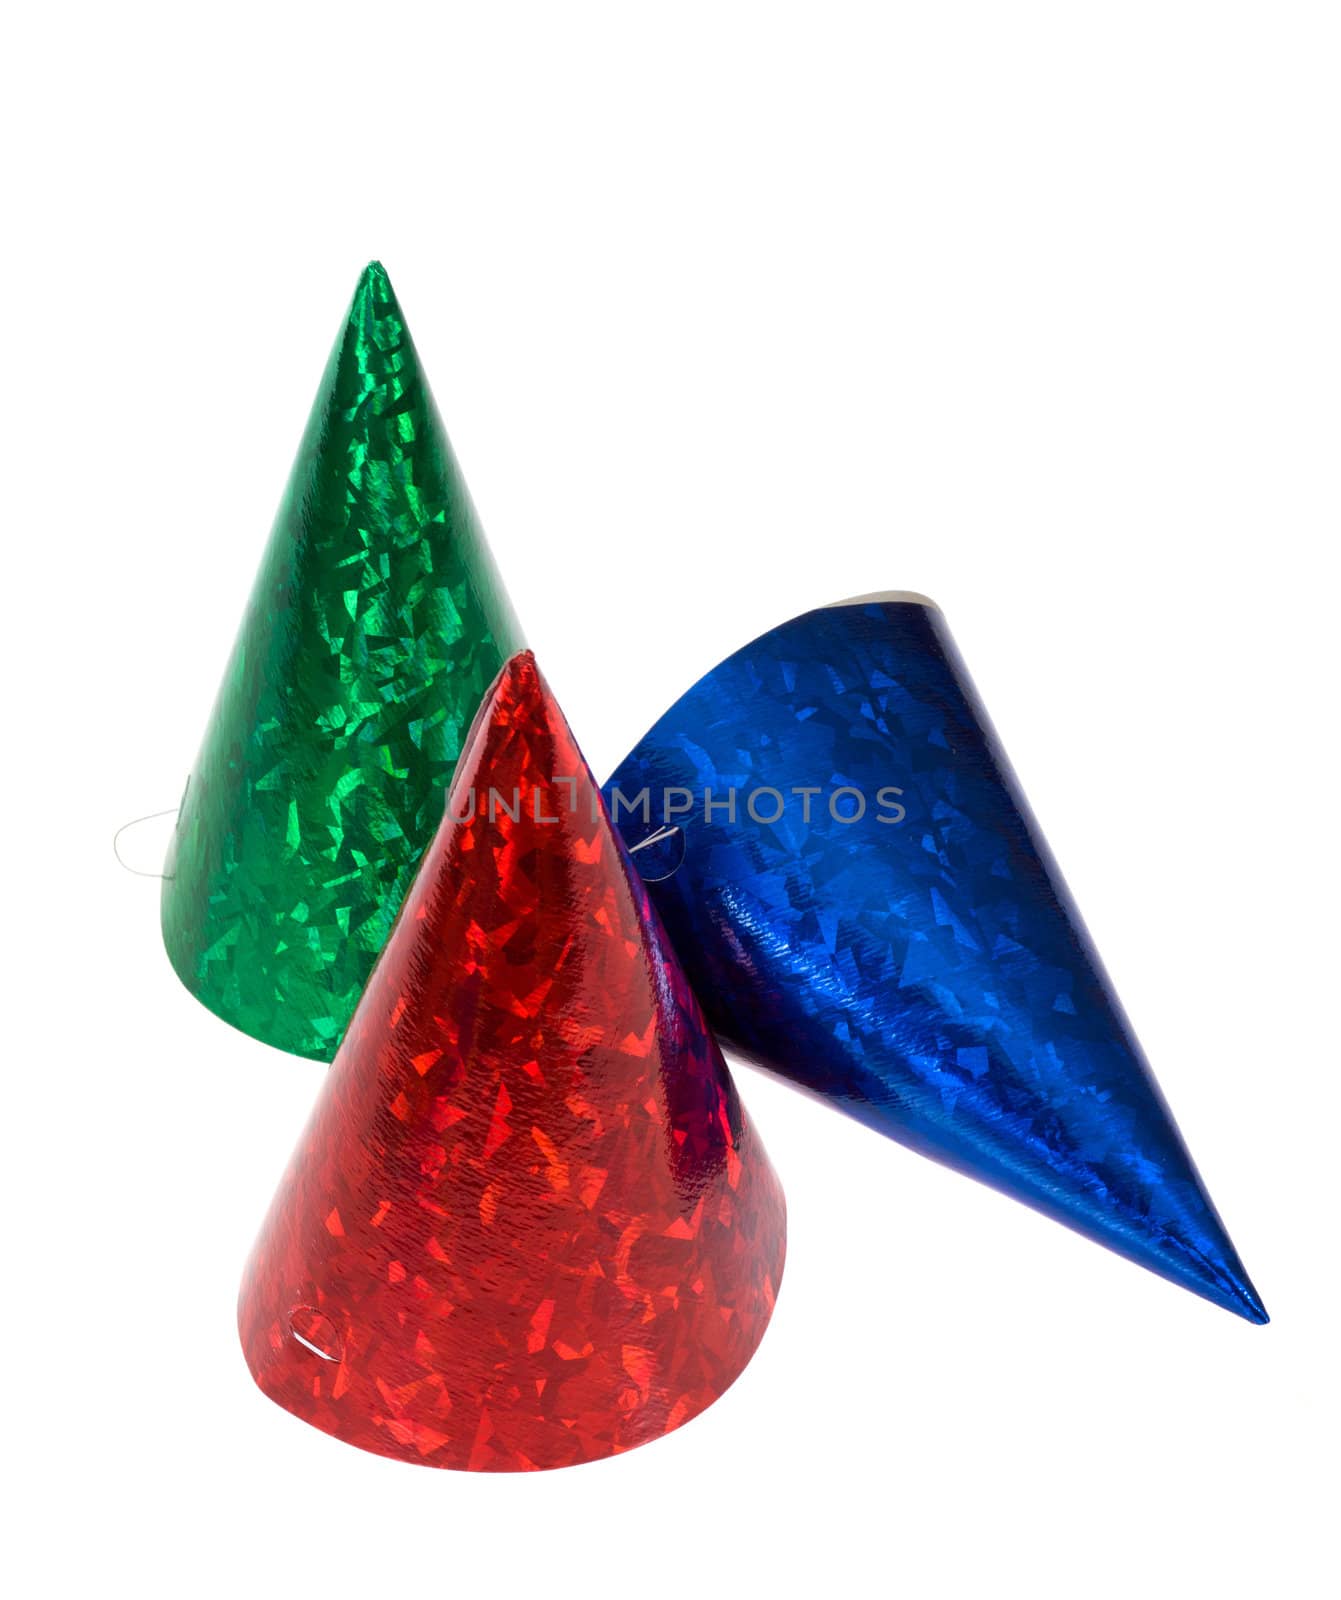 birthday party hats, photo on the white background